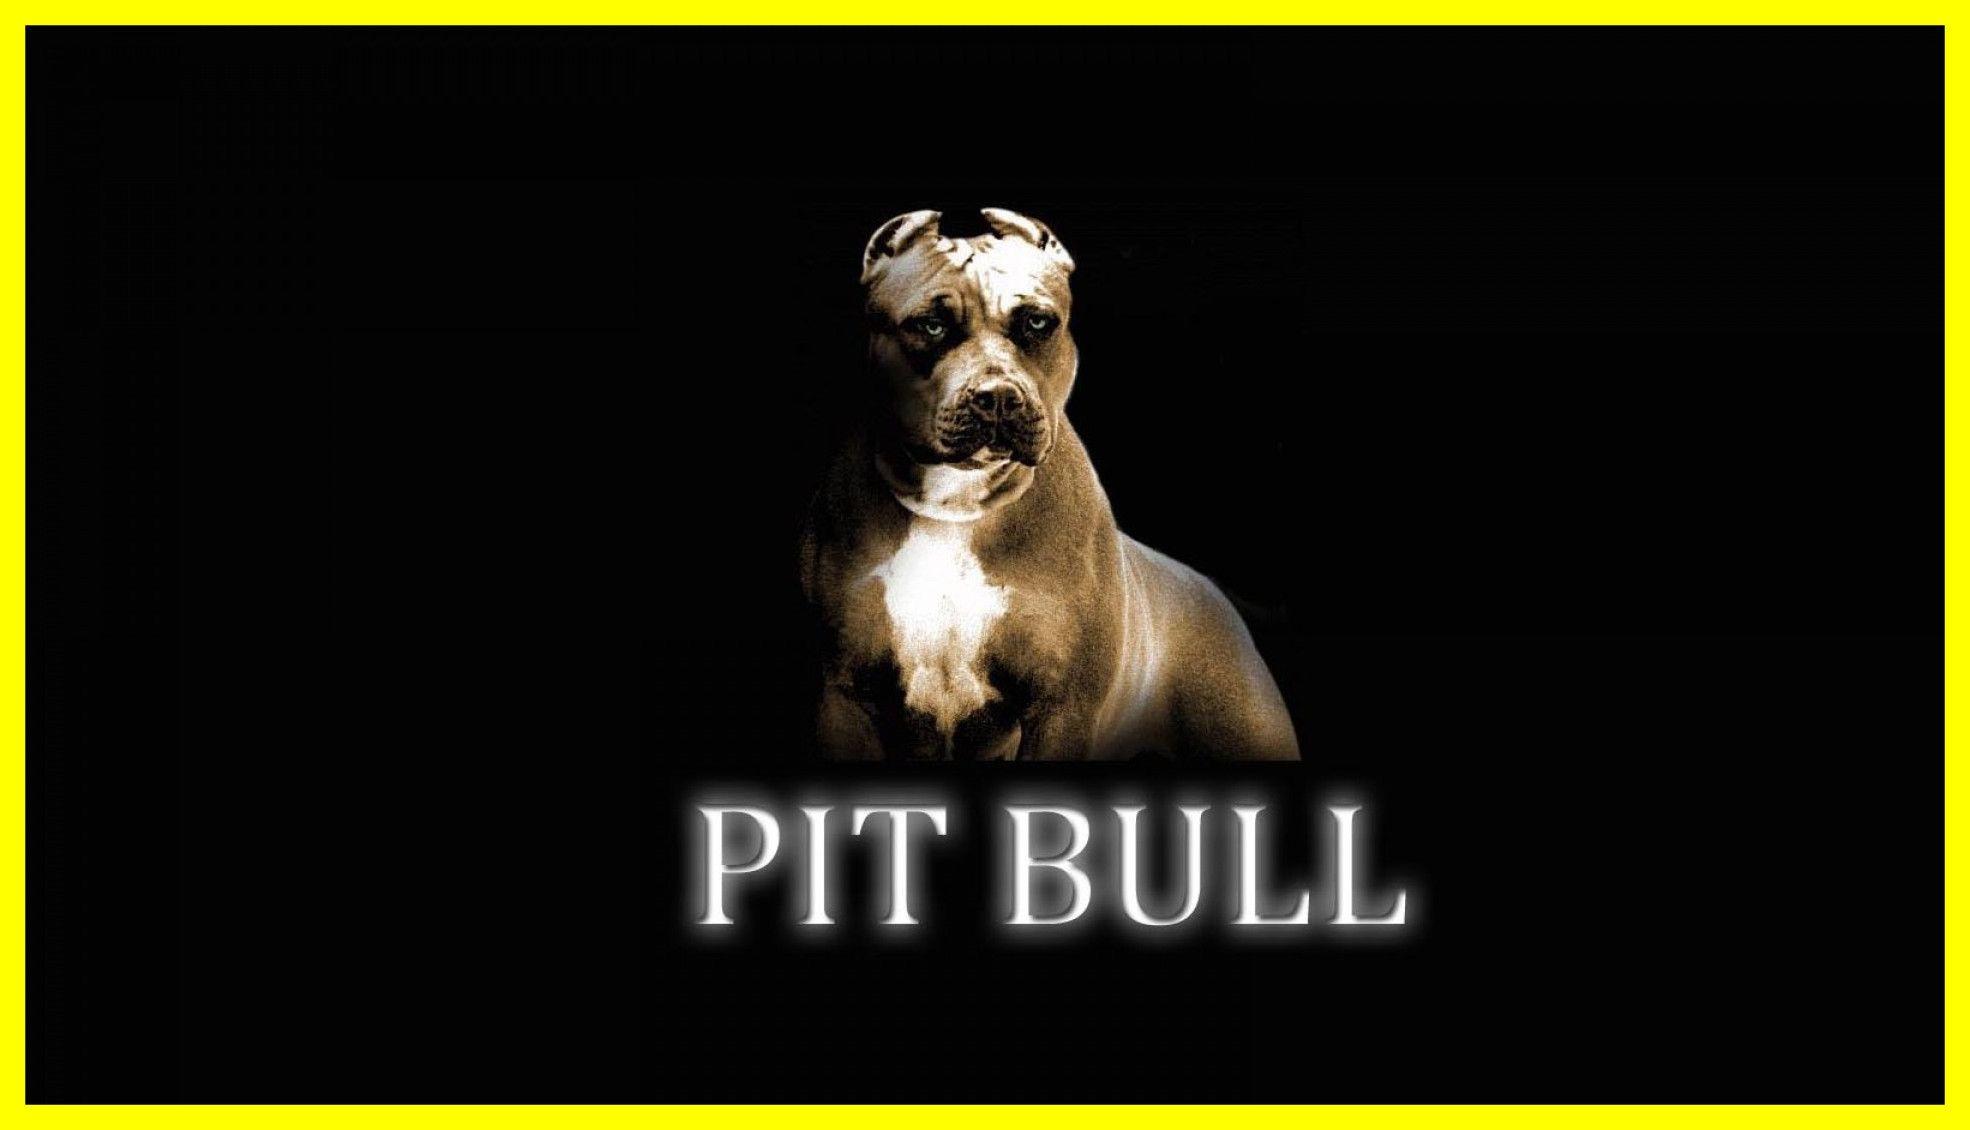 Fascinating Pit Bull Dog Wallpaper Image For Cute Pitbull Quotes